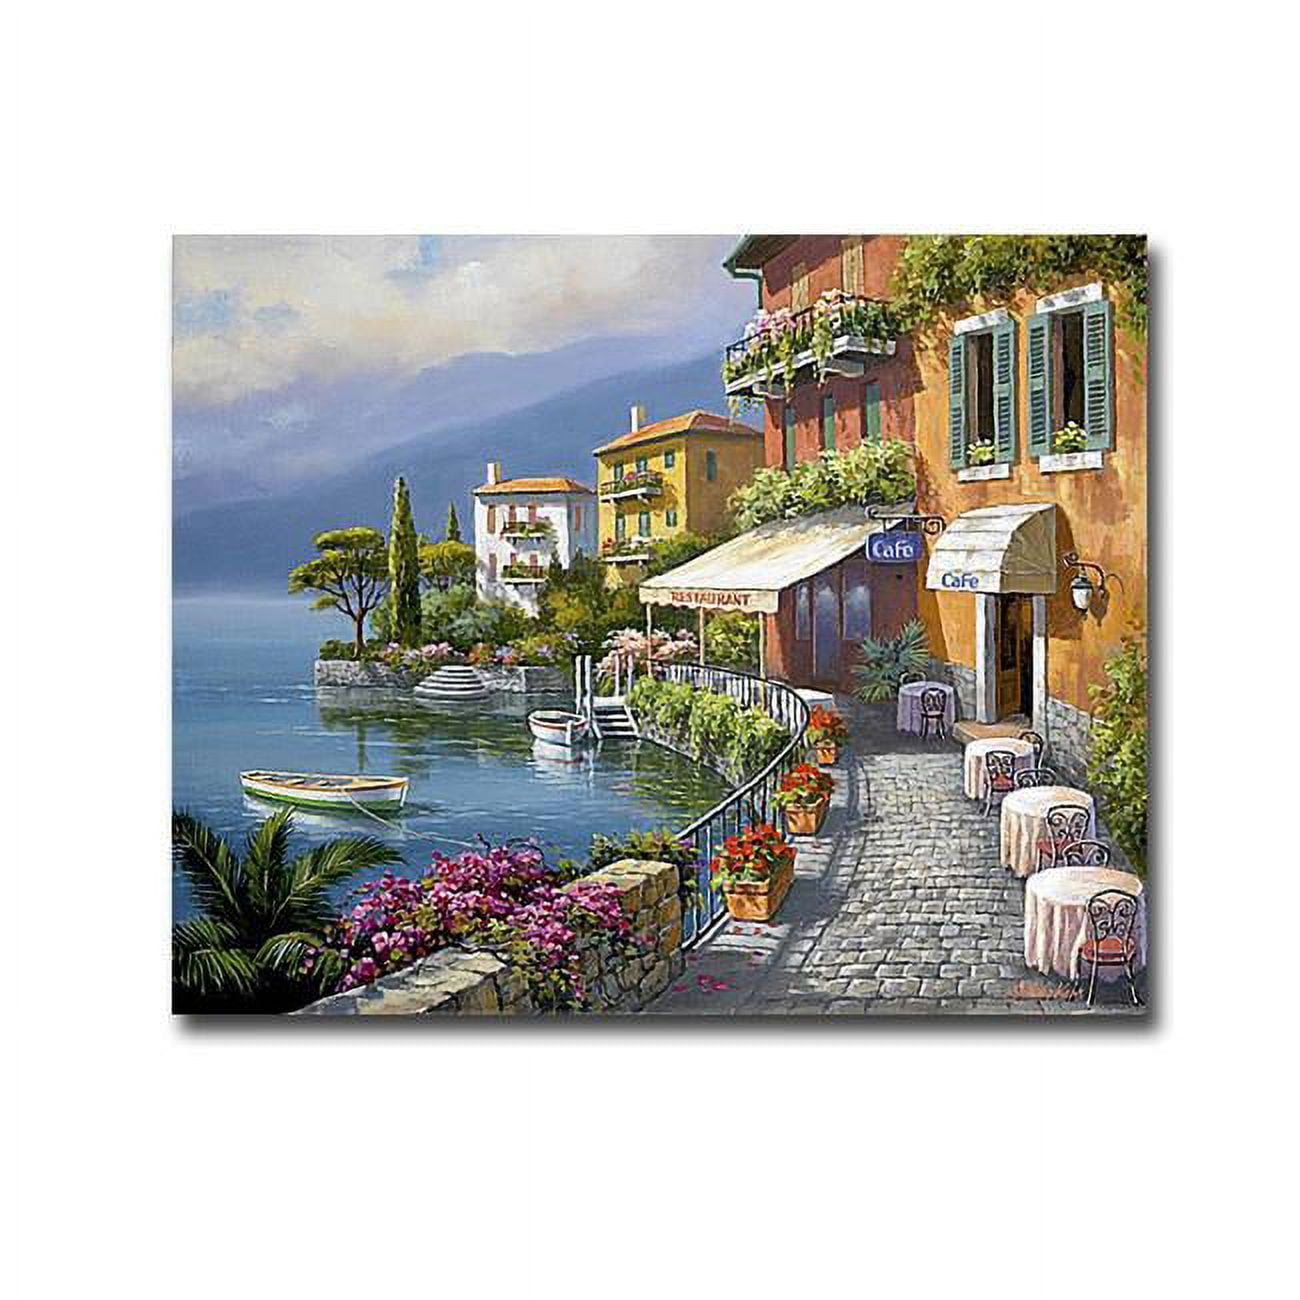 121578ig Seaside Bistro Cafe By Sung Kim Premium Gallery-wrapped Canvas Giclee Art - 12 X 15 In.